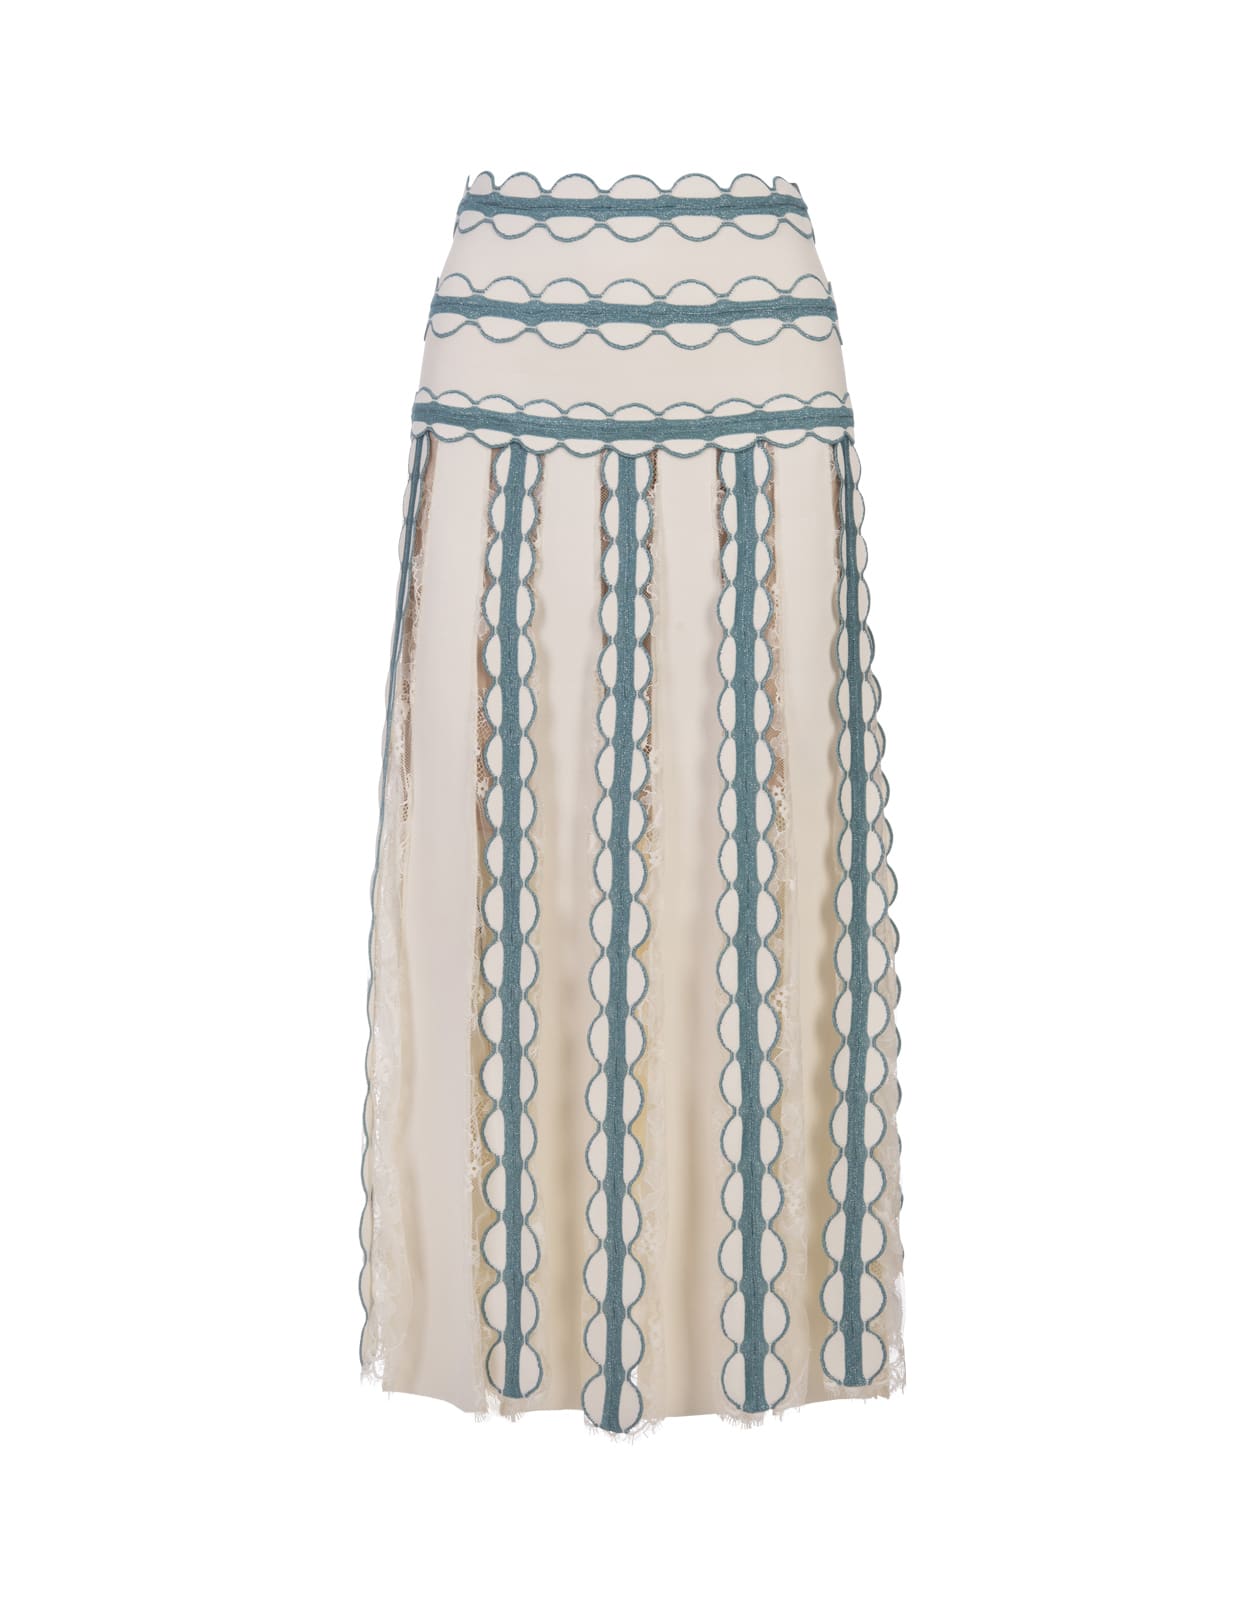 Elie Saab Knit And Lace Midi Skirt In White And Blue Gin